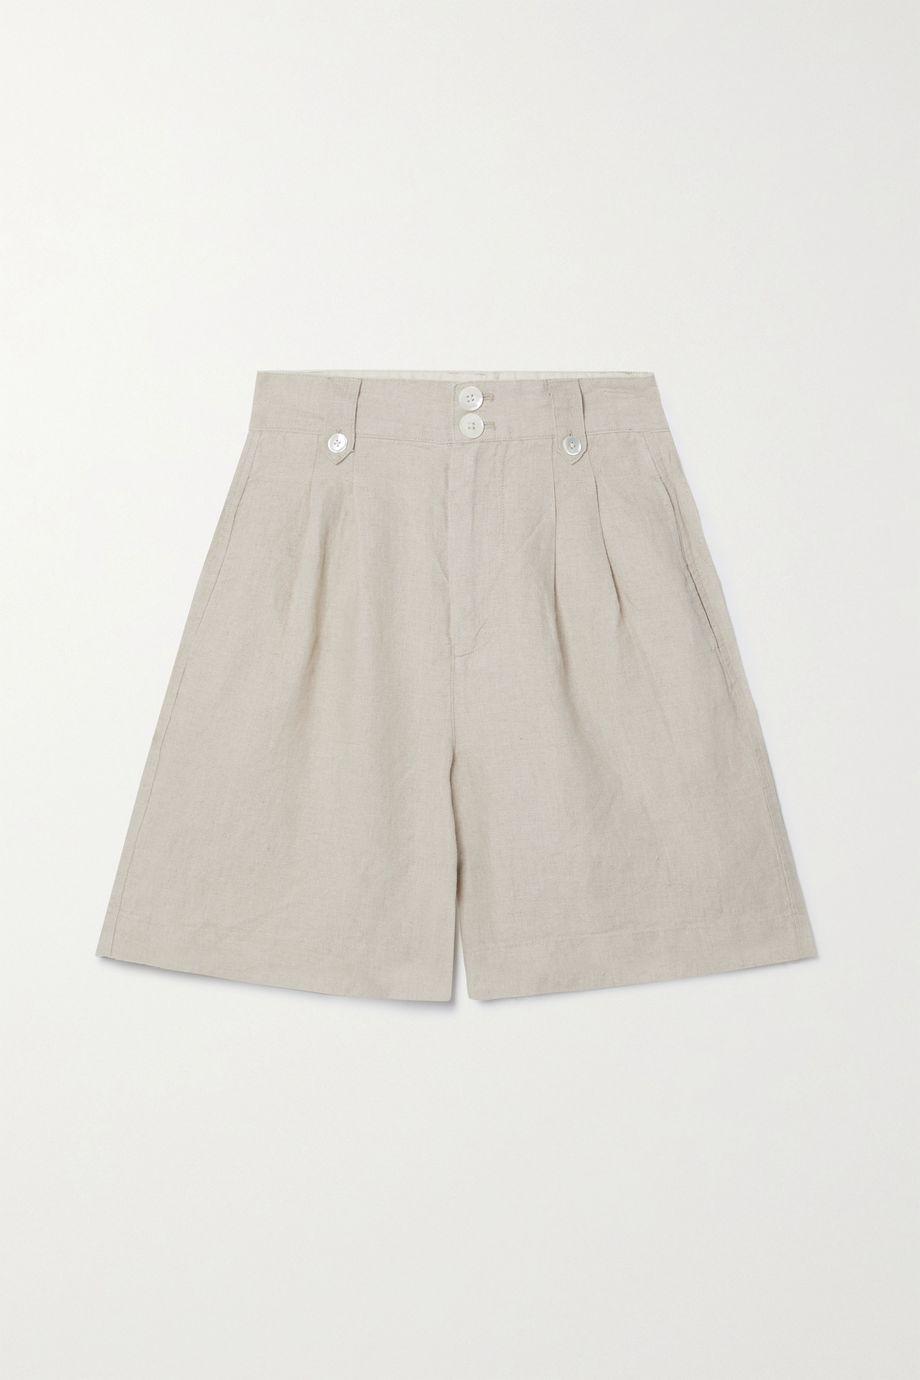 Pleated linen shorts by ALEX MILL